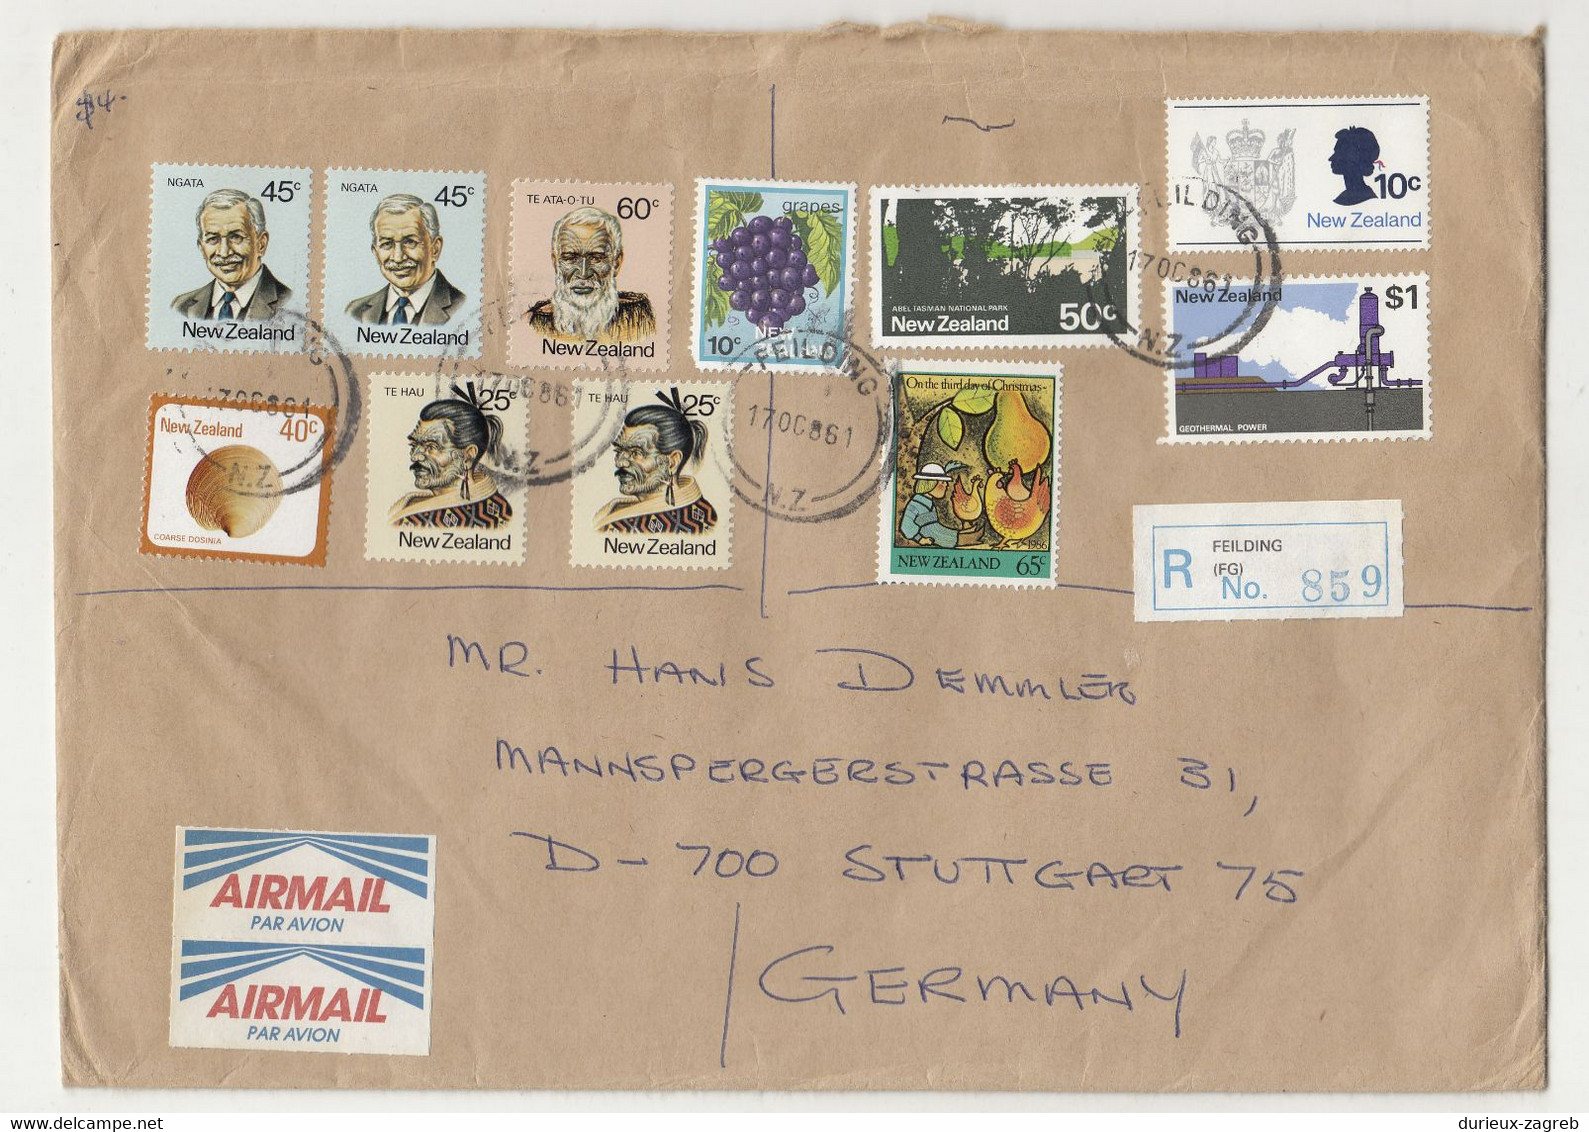 New Zealand Multifranked Large Format Letter Cover Posted Registered Air Mail 1986 Fielding To Germany B230301 - Covers & Documents